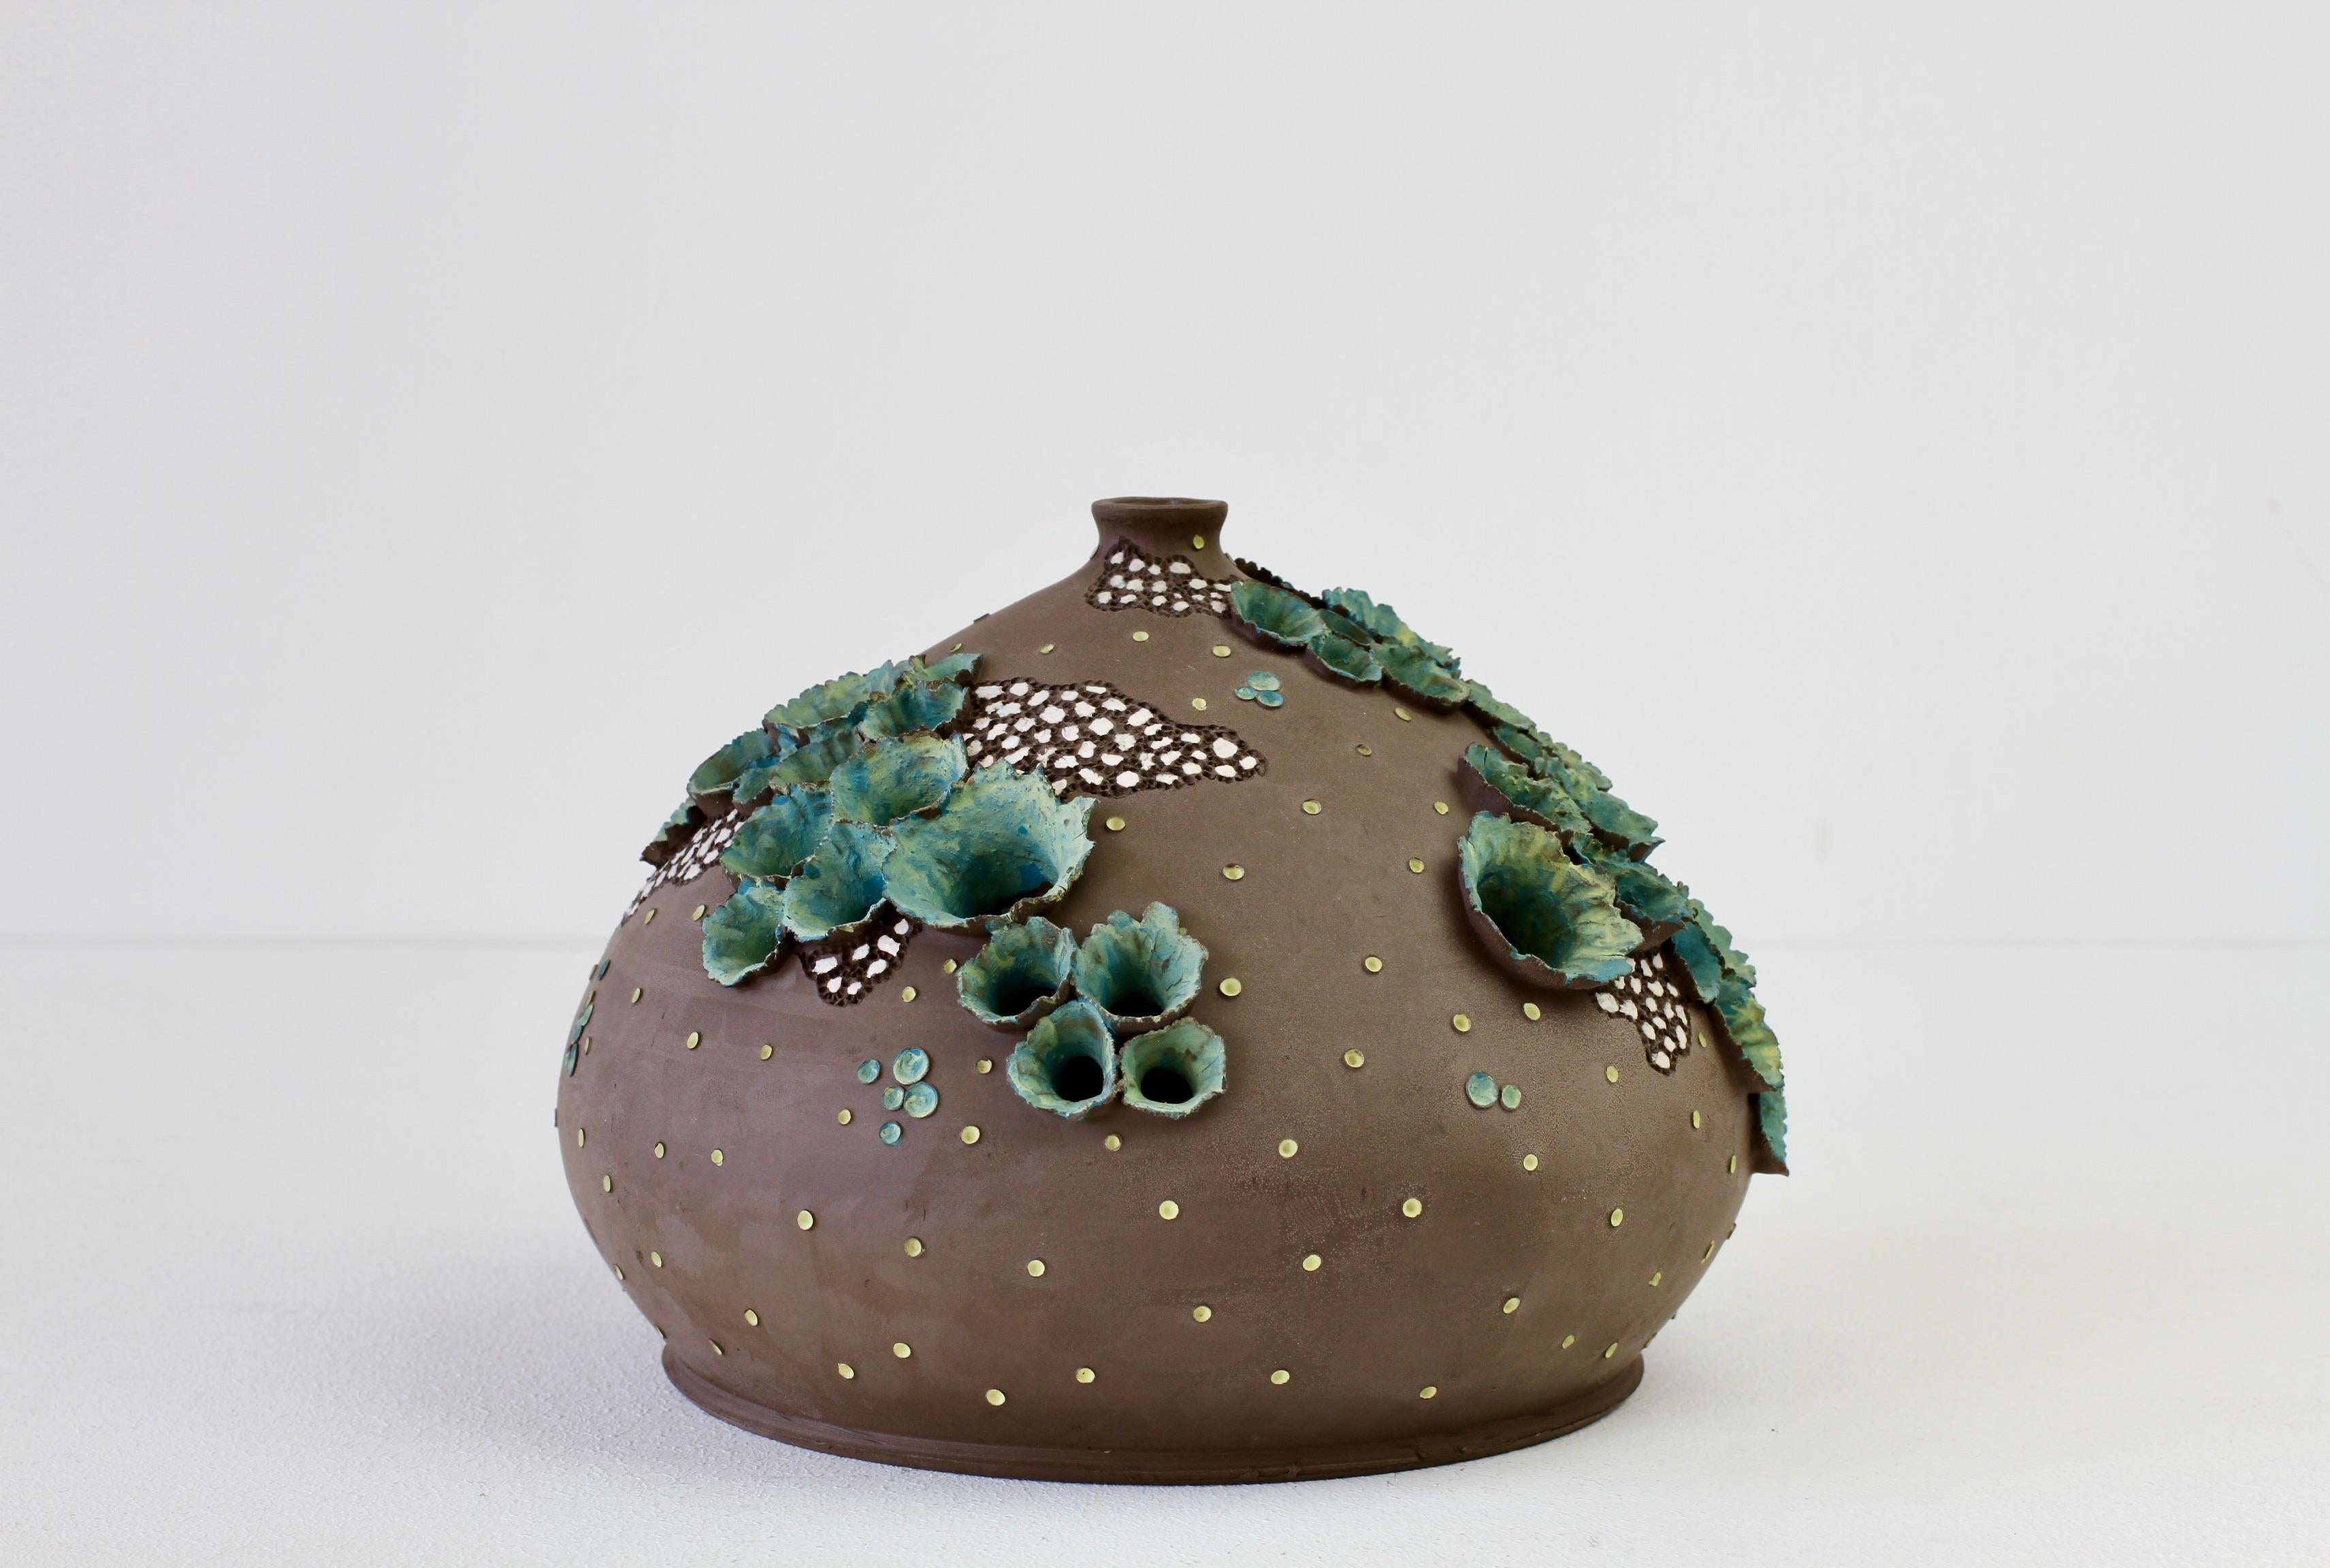 Whimsical, interesting and intriguing piece of studio art pottery vase or vessel with holes and 'flower' / 'plant like' details applied - also made of clay. The piece is signed by the artist but we have not yet been able to identify them. Most